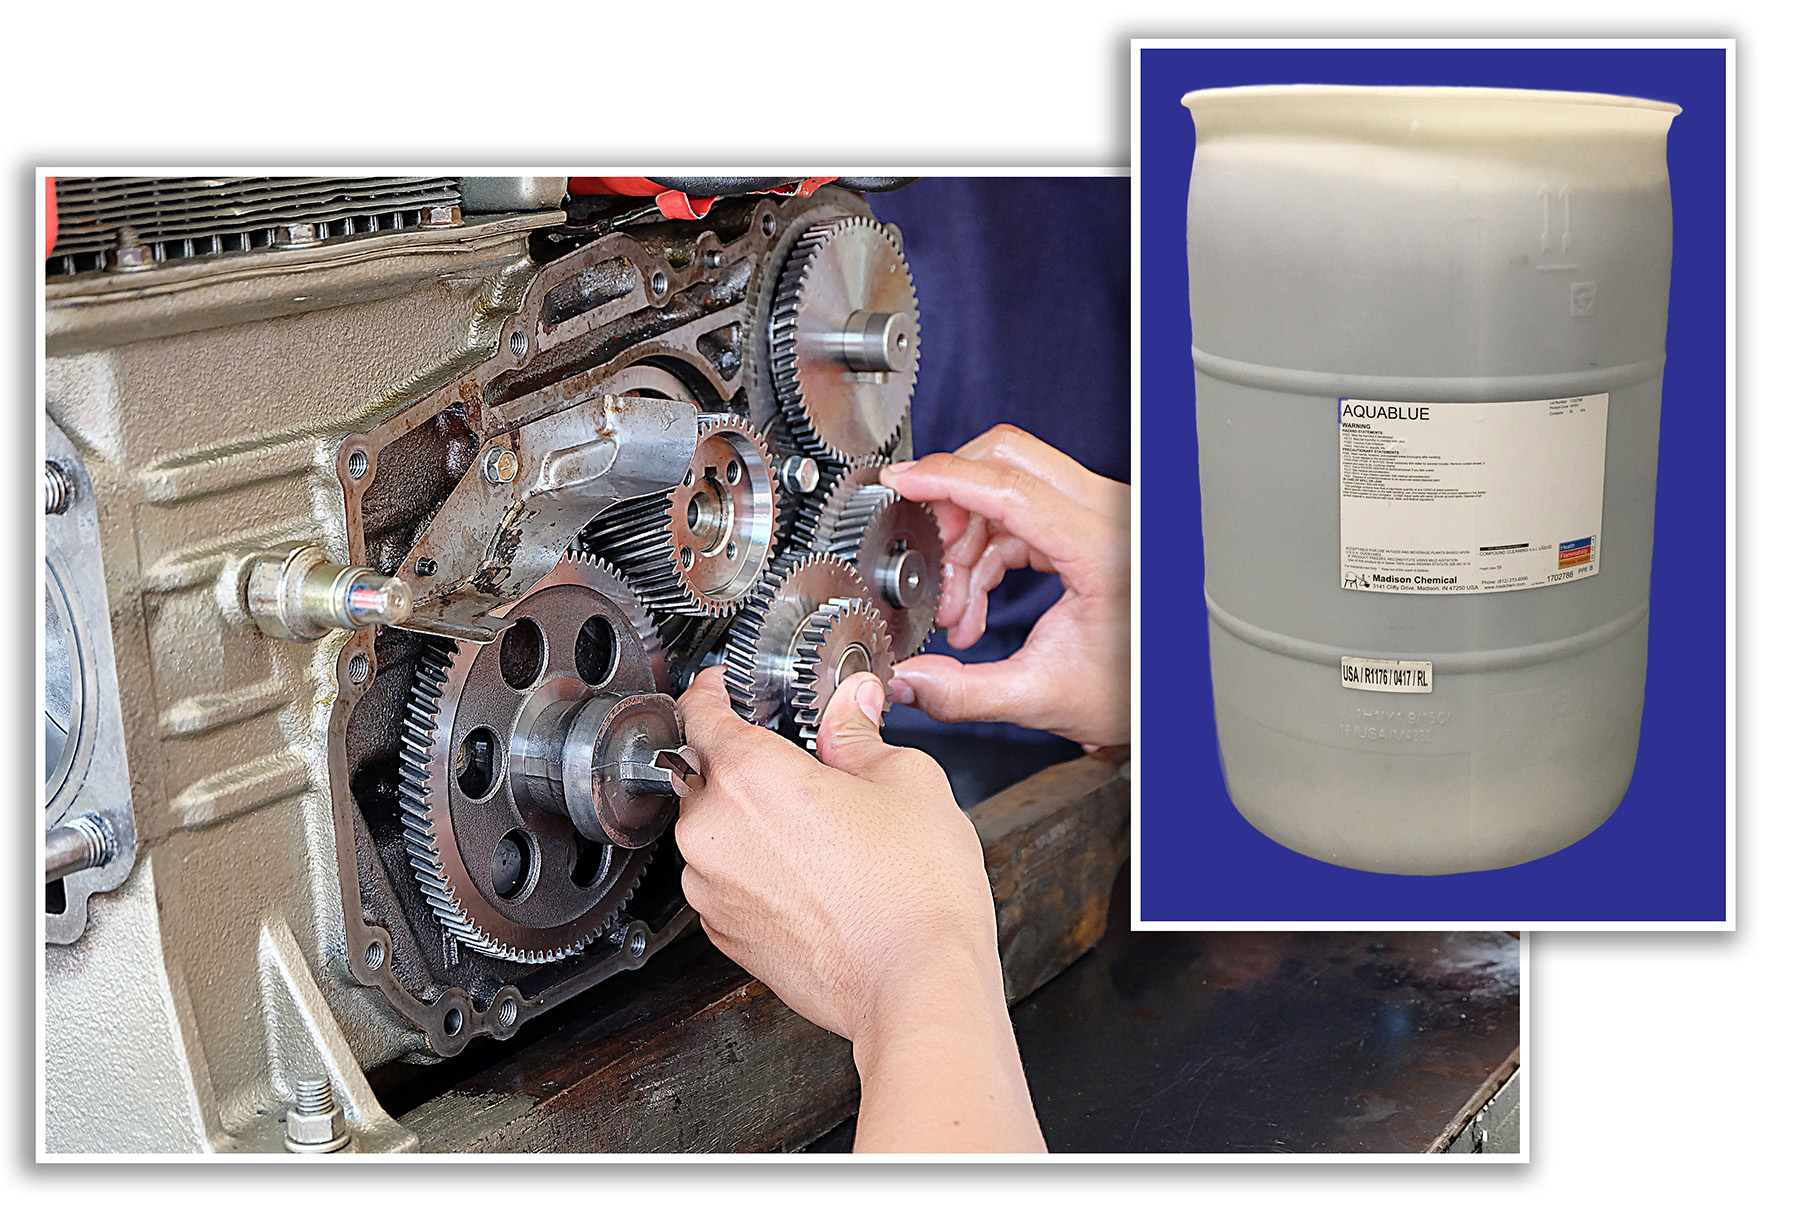 Introducing User-Friendly AquaBlue Multi-Metal Cleaner Ideal for Fast Cleaning & Degreasing